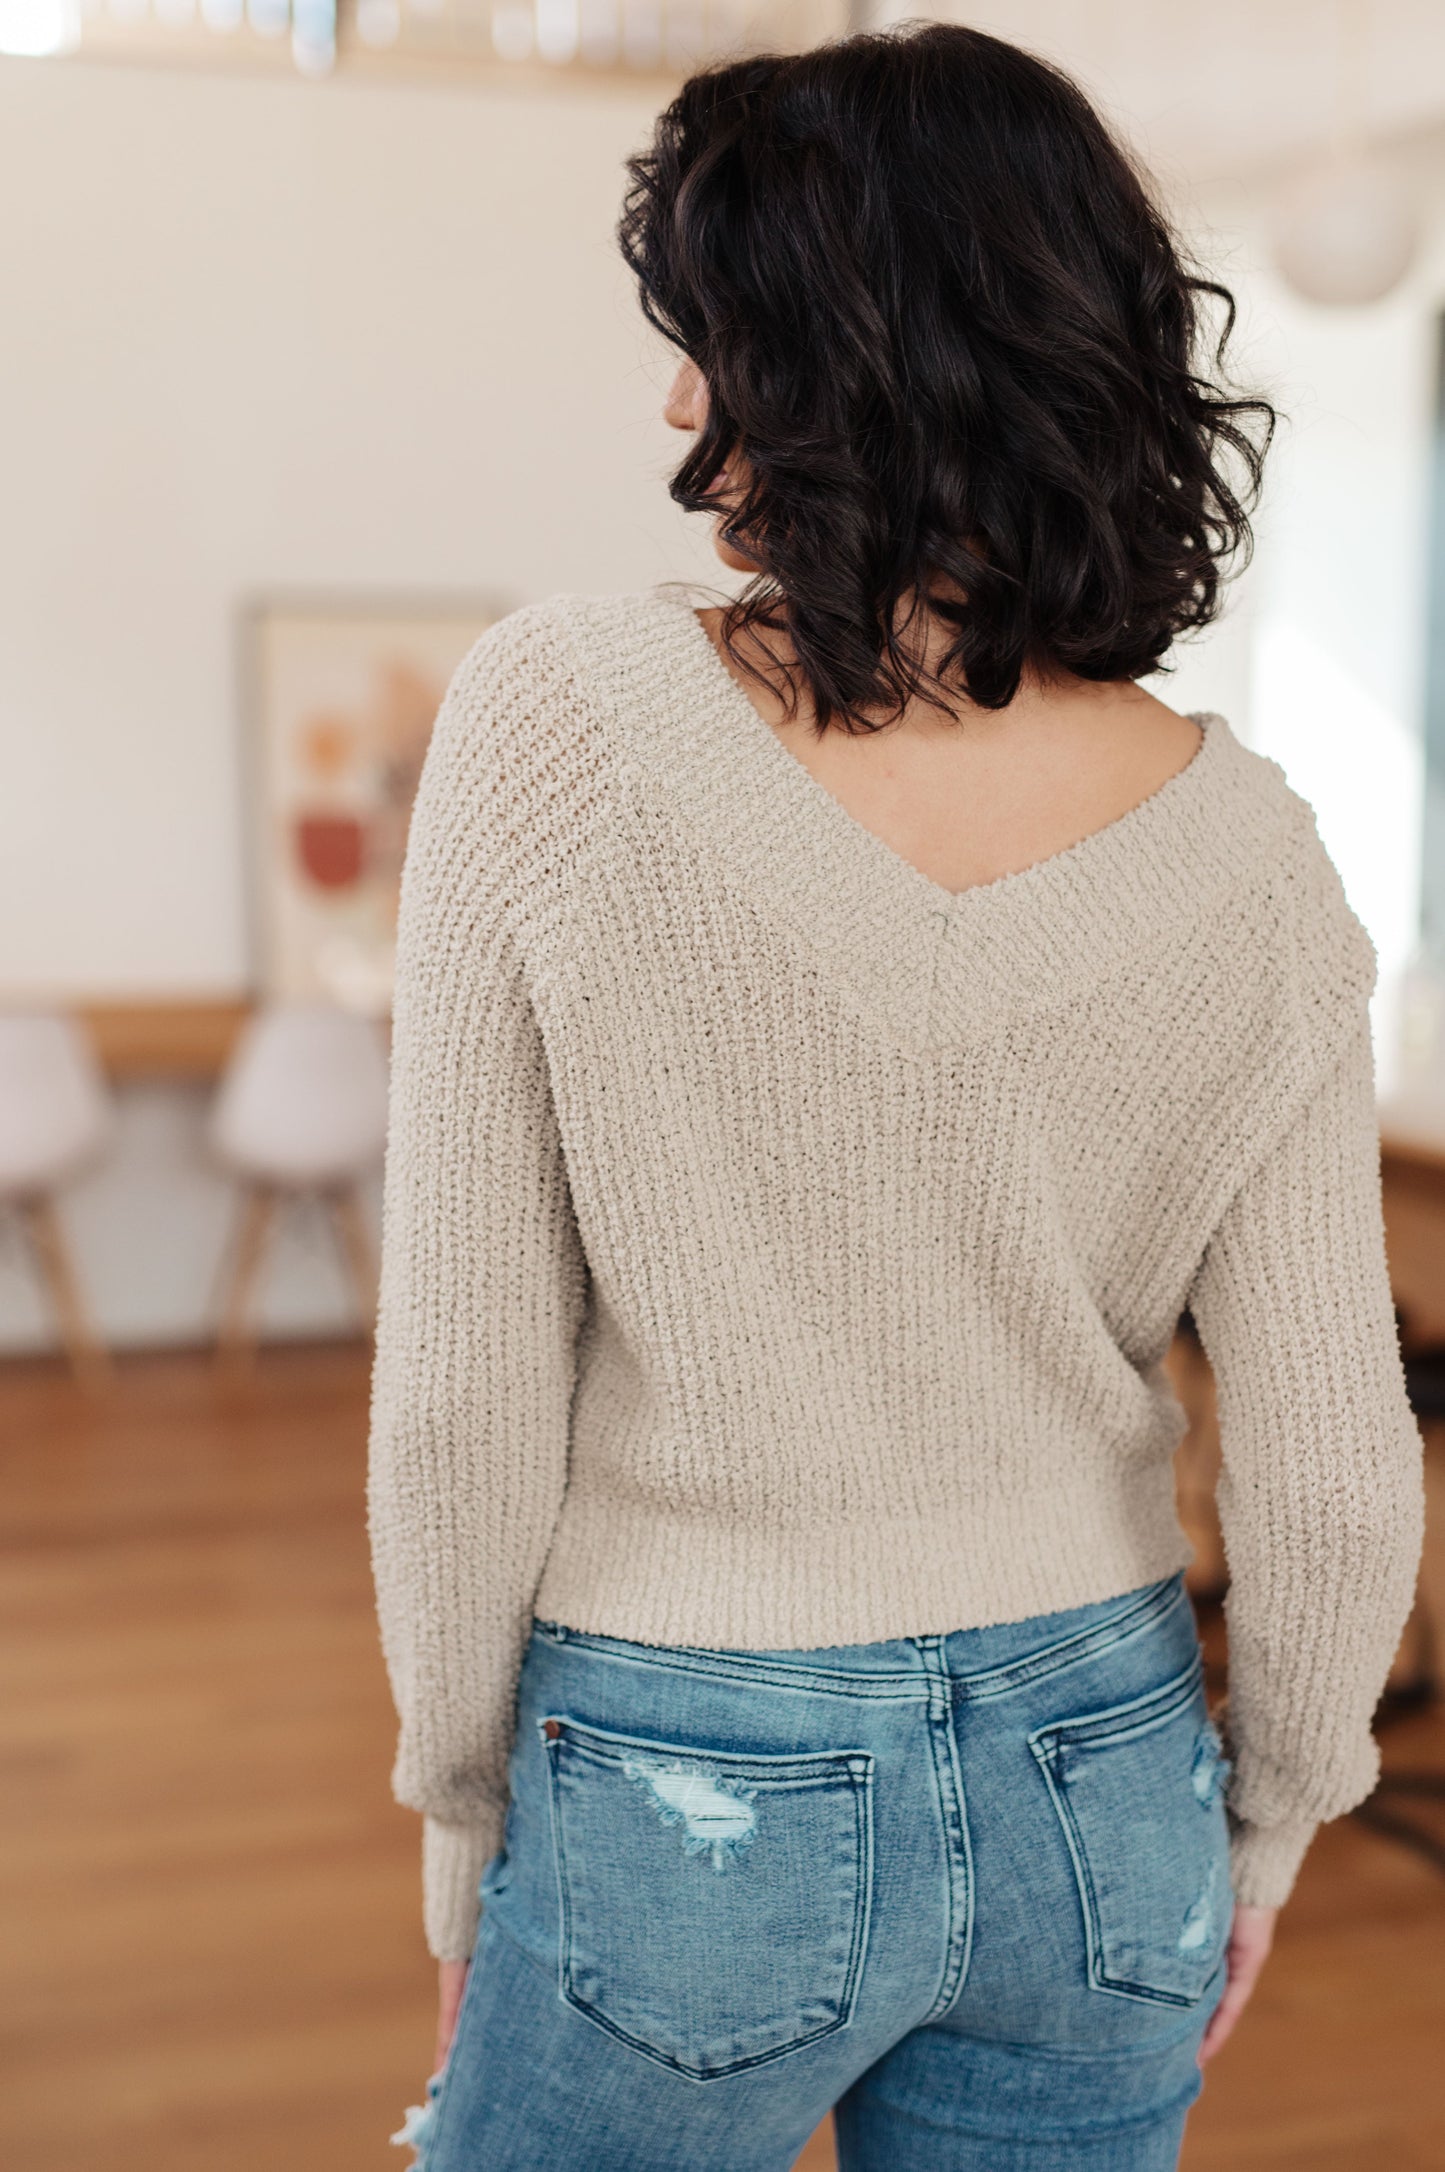 Stuck In The Moment V-Neck Sweater in Oatmeal